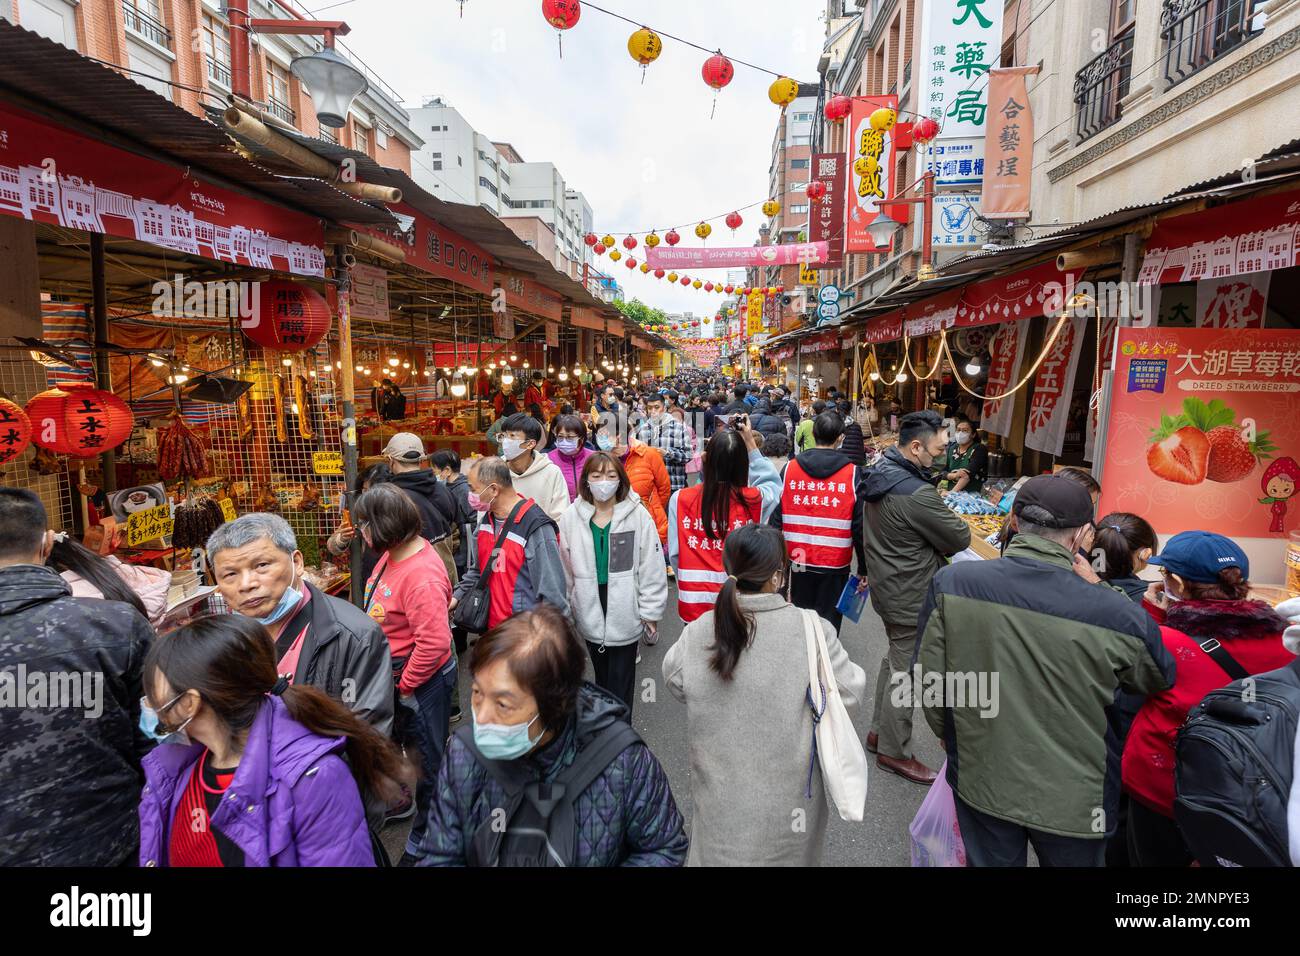 Crowds of Taipei residents shop at the Dihua St New Year market in Taipei, Taiwan. Stock Photo